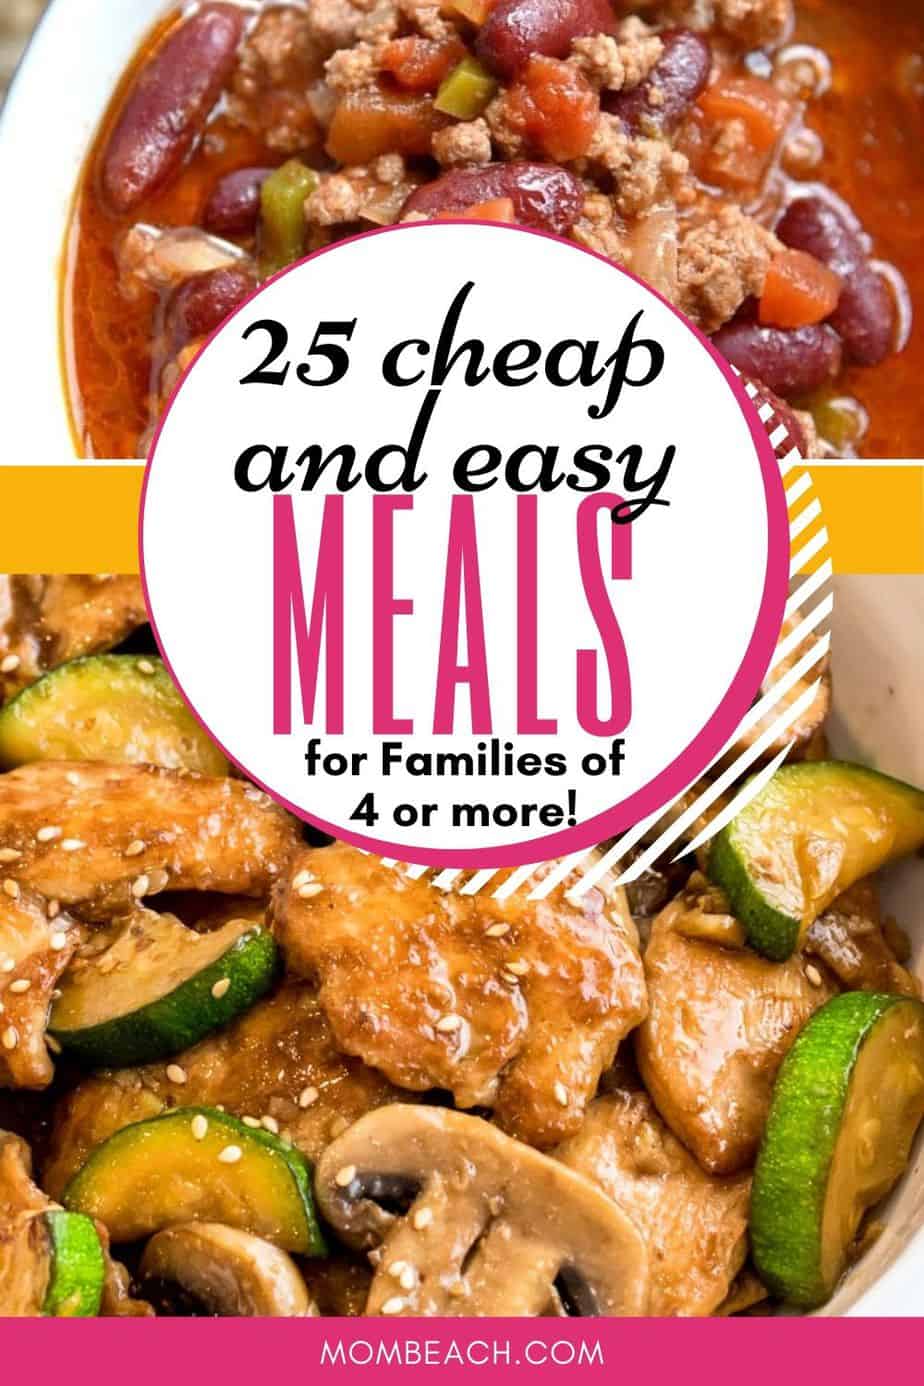 25-cheap-and-easy-healthy-meals-for-families-of-4-or-more